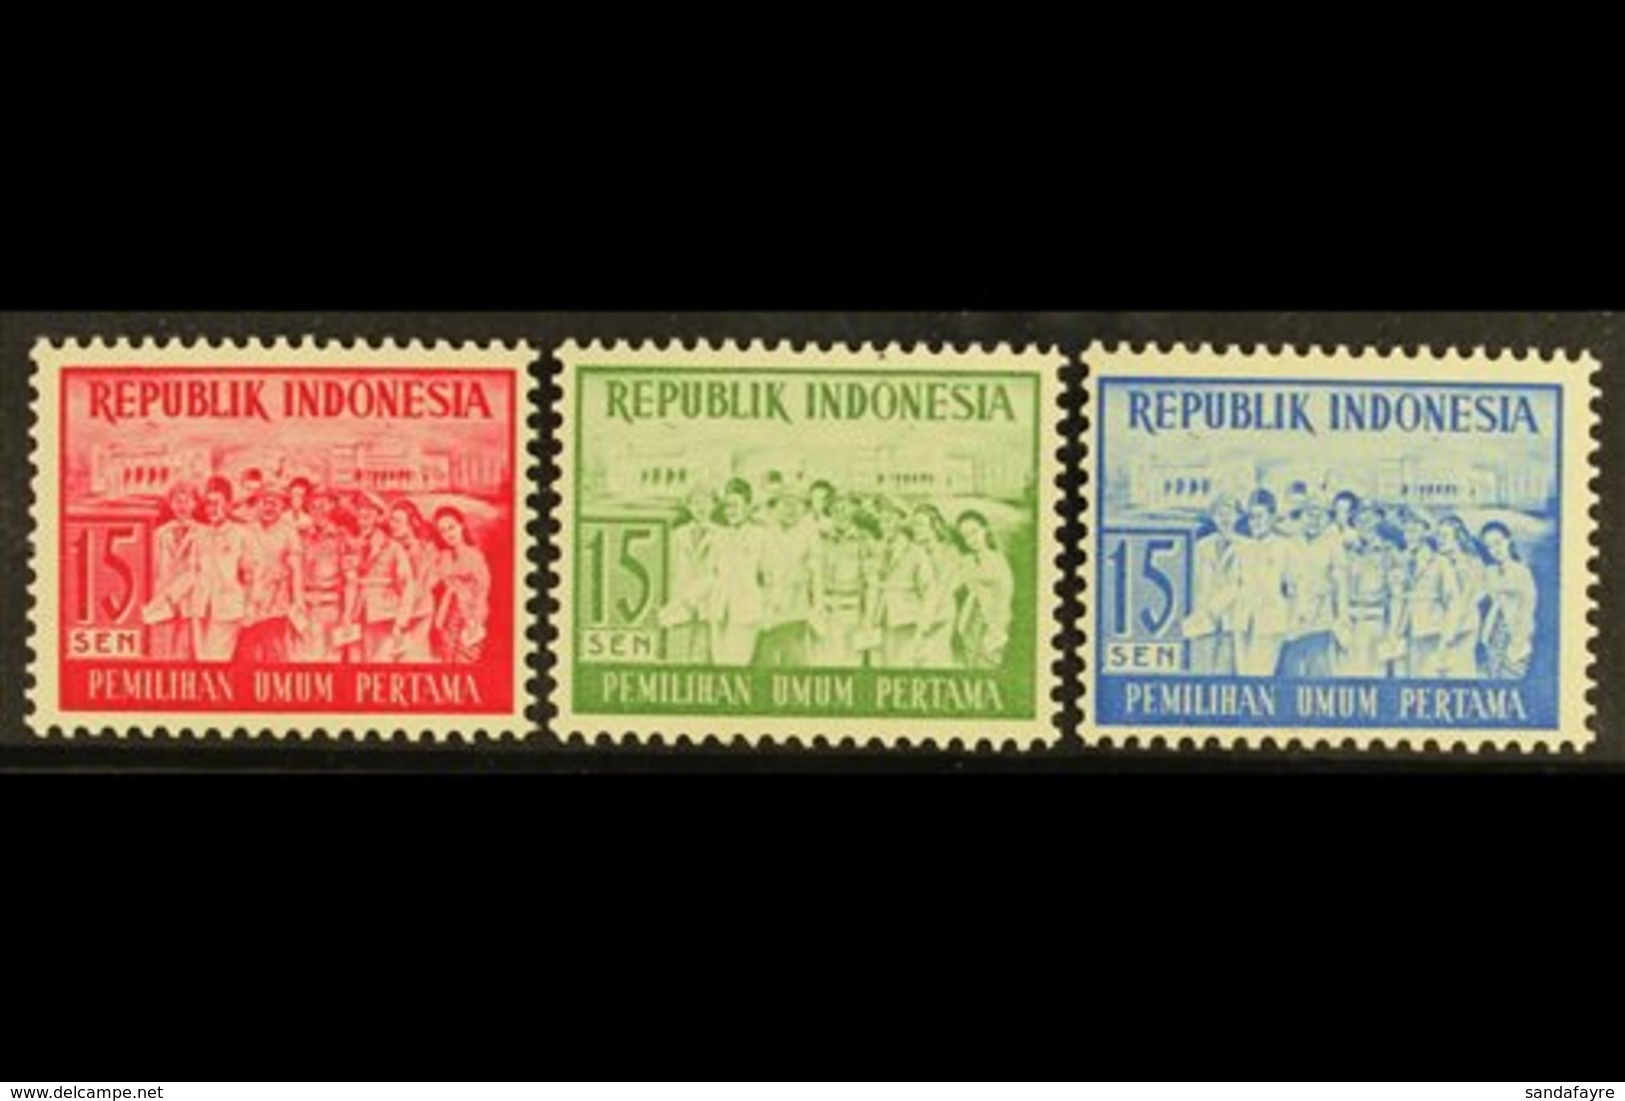 1955 RARE PROOFS. 15s Elections Perf PROOFS In Three Different Colours (red, Green & Blue) On Ungummed Paper, Catalogue  - Indonesien